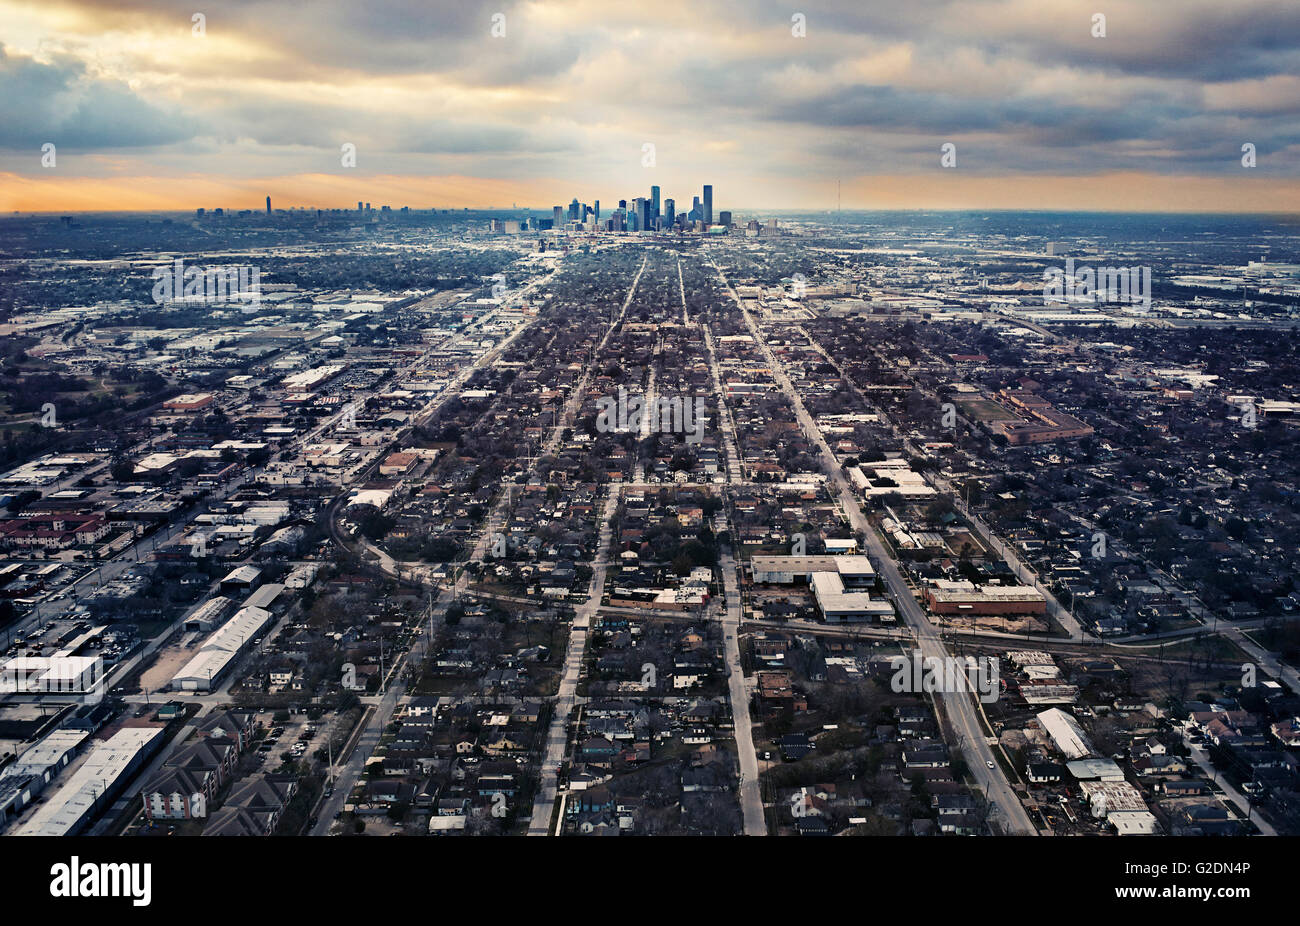 Aerial of the Uptown area of Houston Texas Stock Photo - Alamy